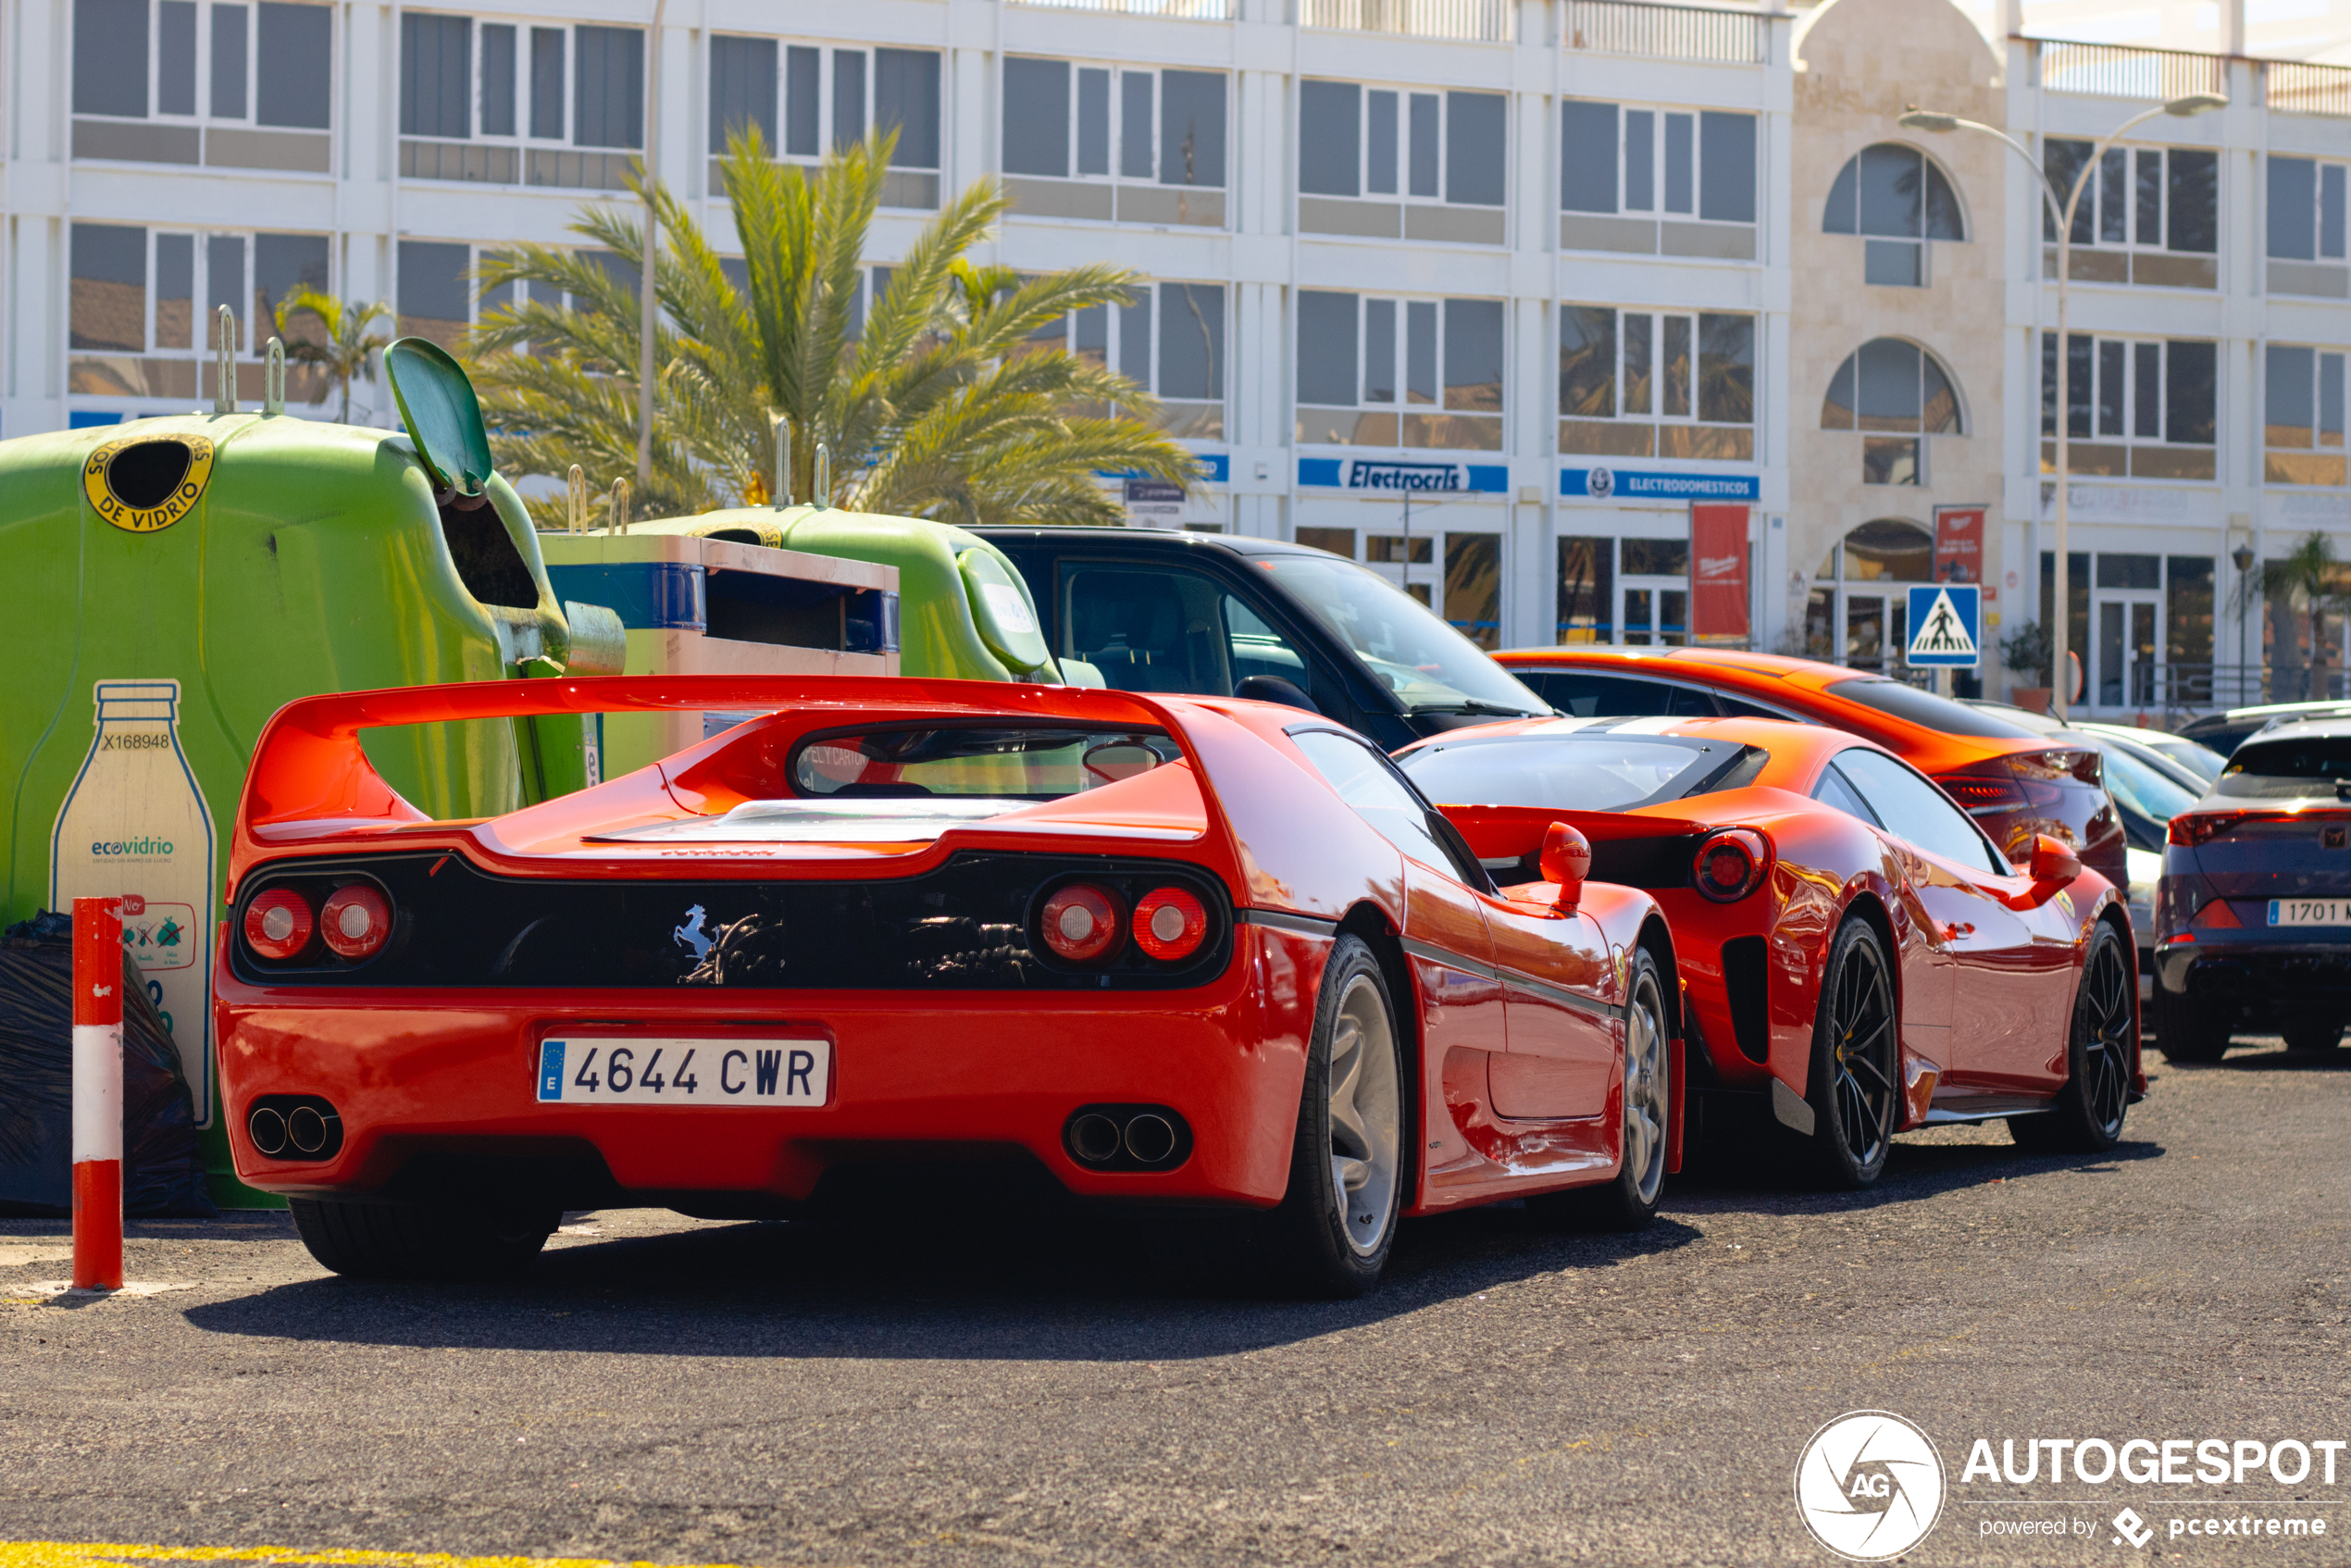 These Ferraris have been dumped